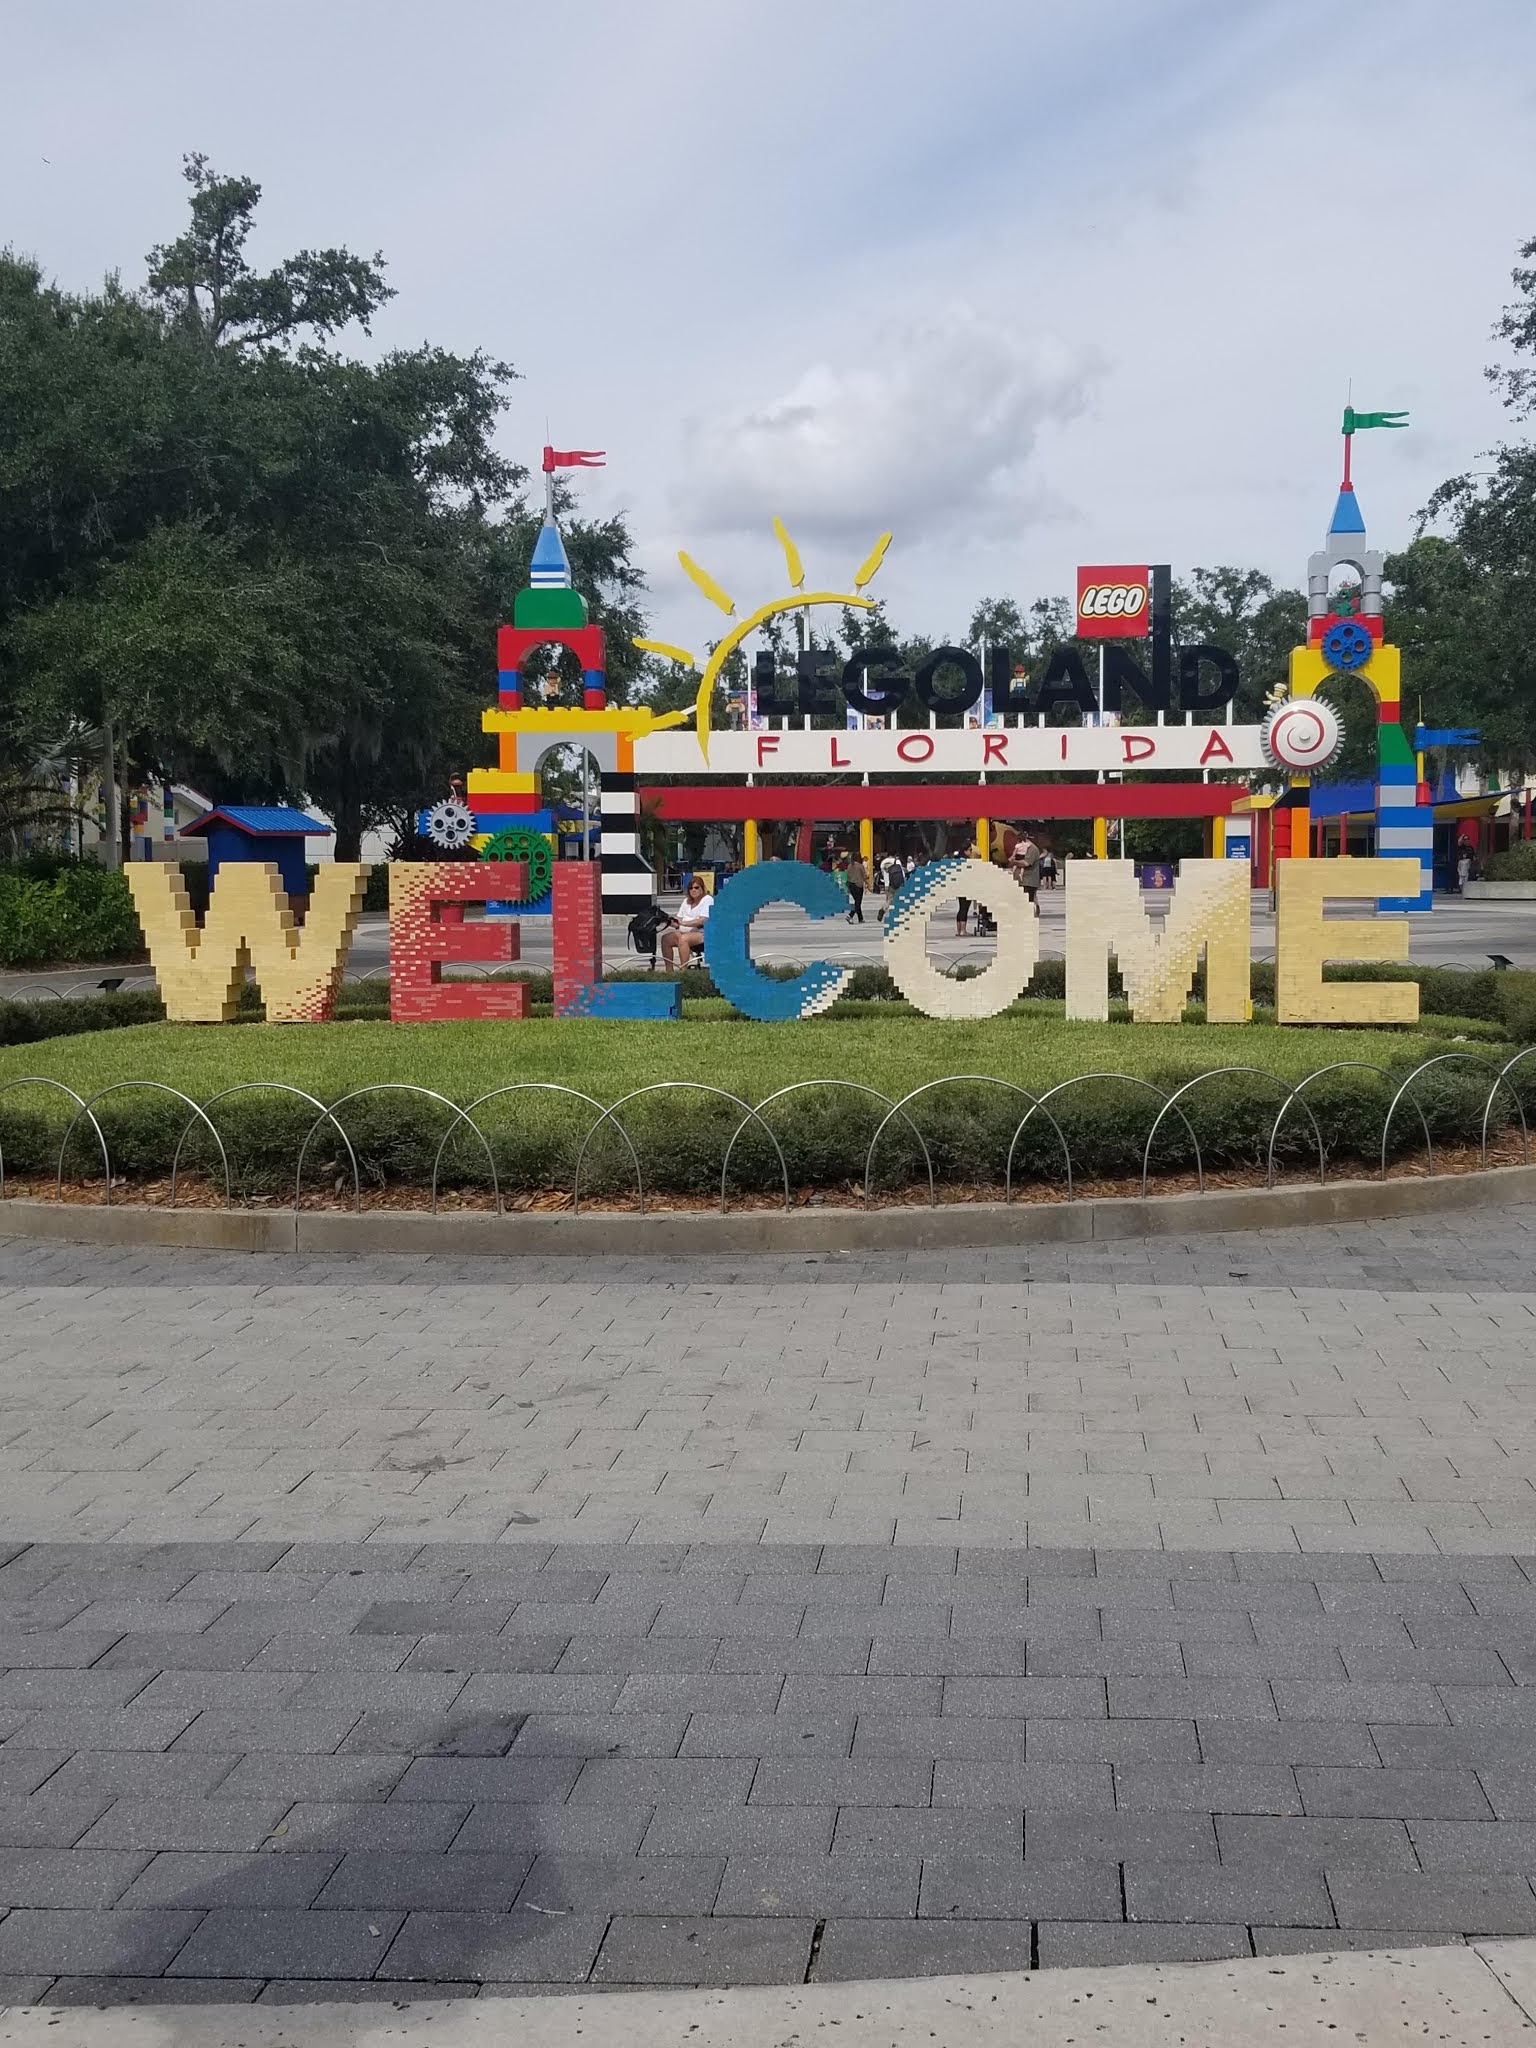 Our First Trip to Legoland 